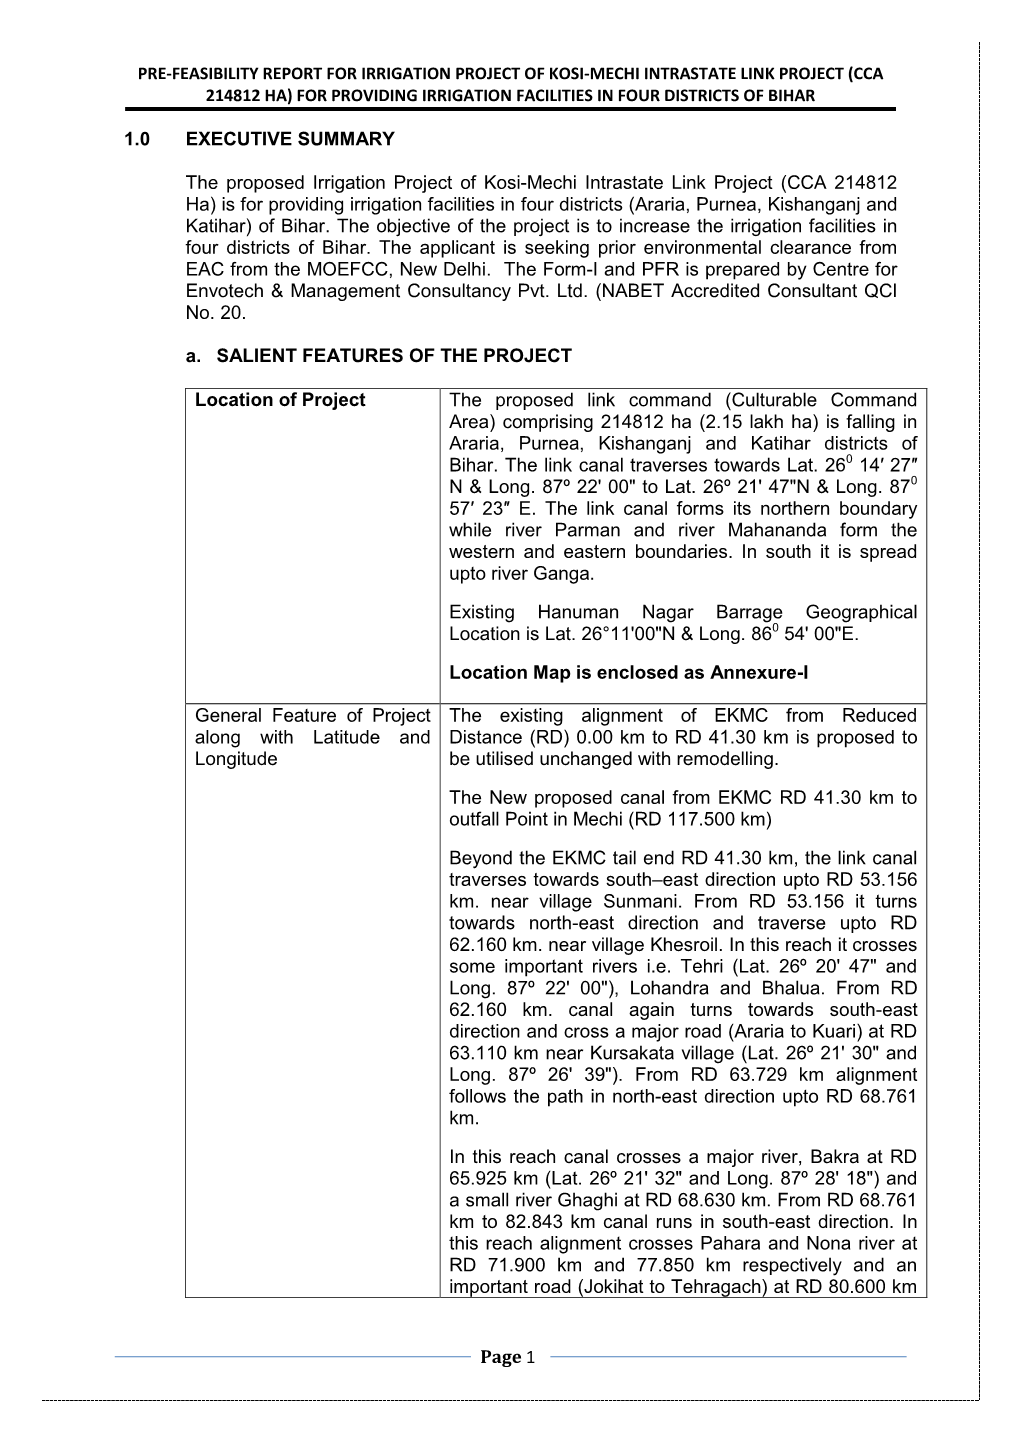 Pre-Feasibility Report for Irrigation Project of Kosi-Mechi Intrastate Link Project (Cca 214812 Ha) for Providing Irrigation Facilities in Four Districts of Bihar